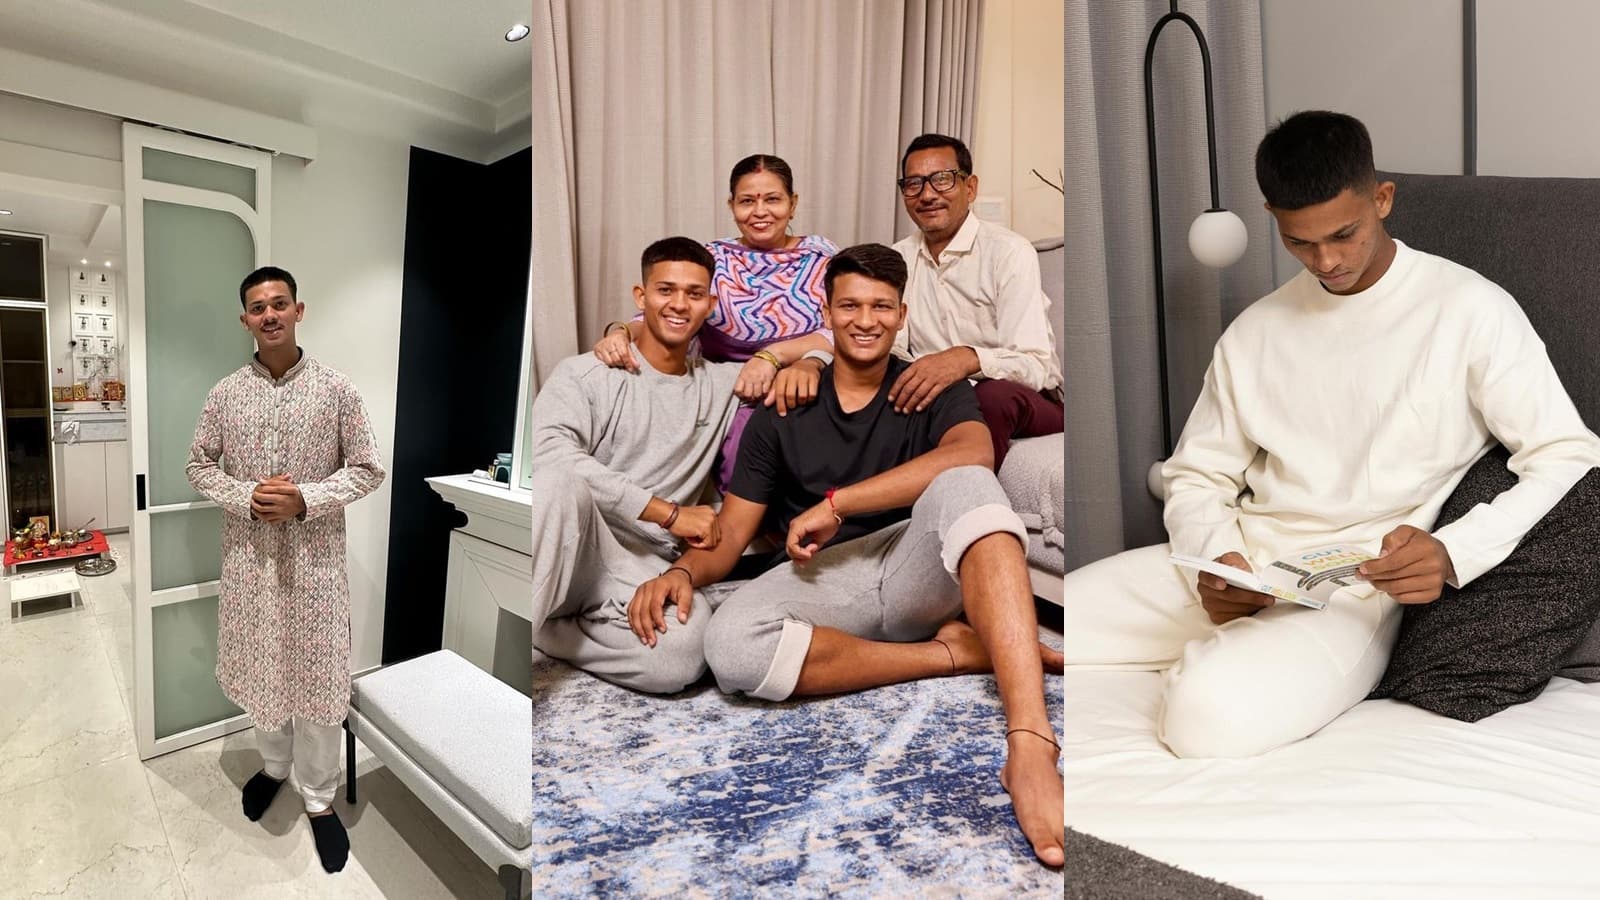 Yashasvi Jaiswal once used to spend night living in tent, now he owns luxurious 5 BHK flat, see photos